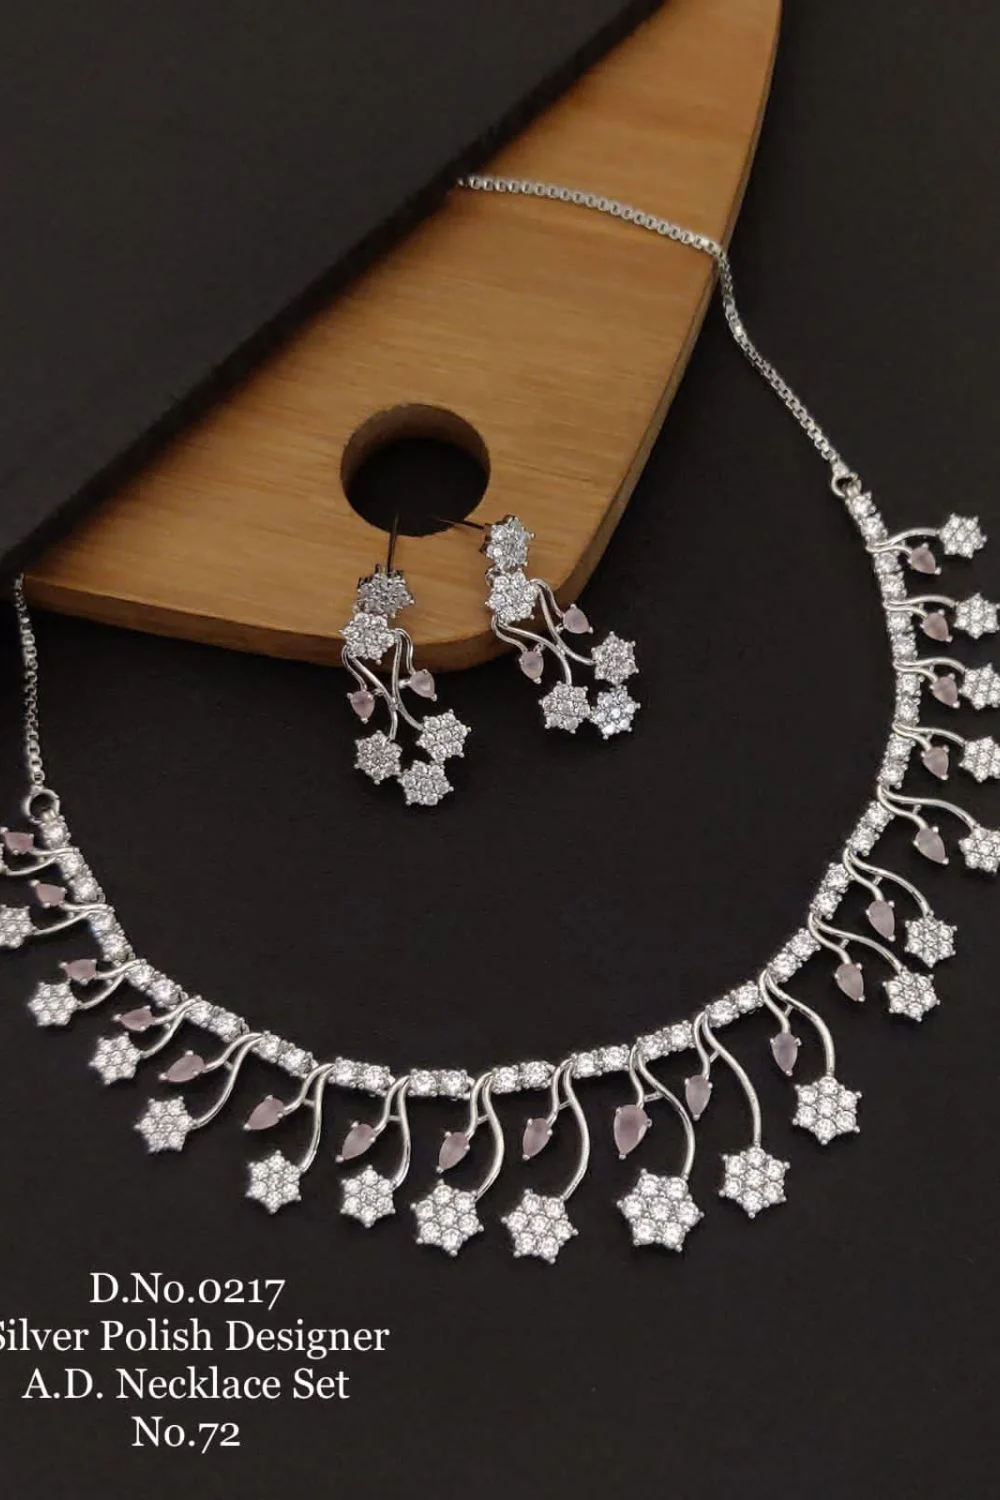 Glorious Silver Polished AD Necklace